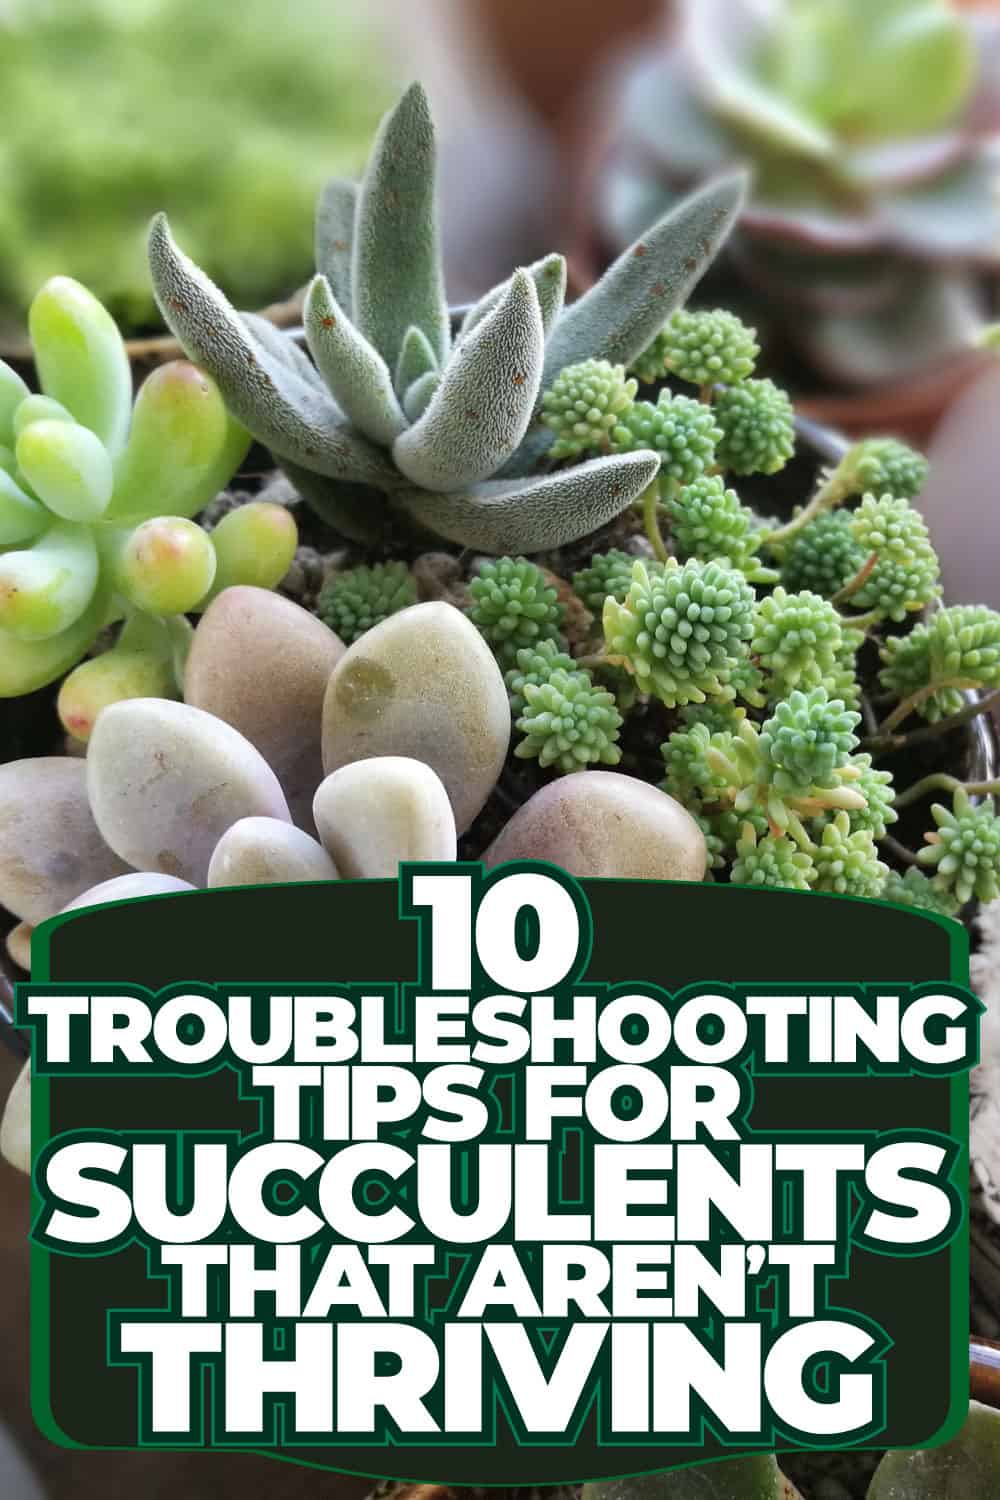 10 Troubleshooting Tips for Succulents That Aren't Thriving